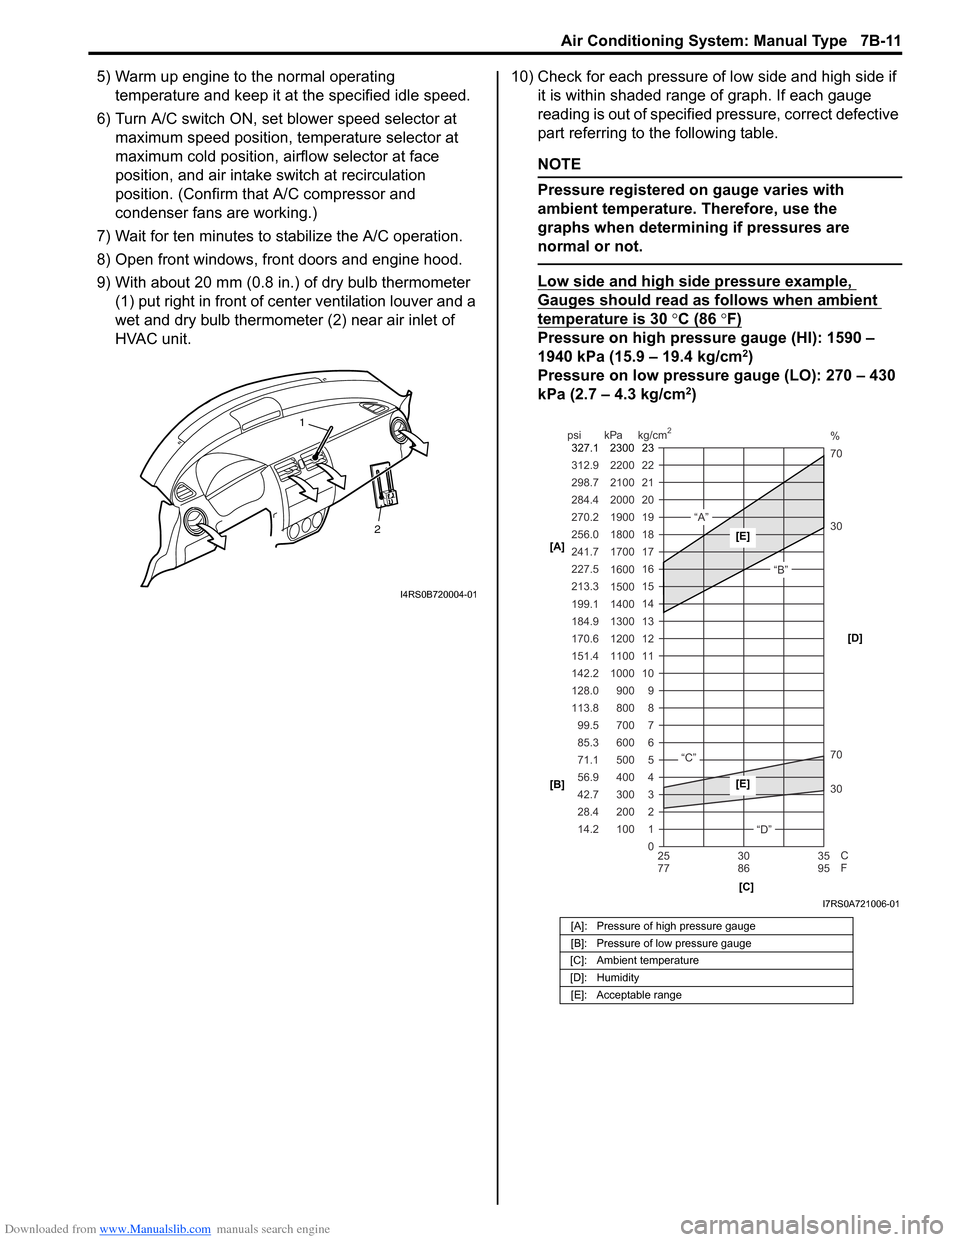 SUZUKI SWIFT 2006 2.G Service Workshop Manual Downloaded from www.Manualslib.com manuals search engine Air Conditioning System: Manual Type 7B-11
5) Warm up engine to the normal operating temperature and keep it at the specified idle speed.
6) Tu